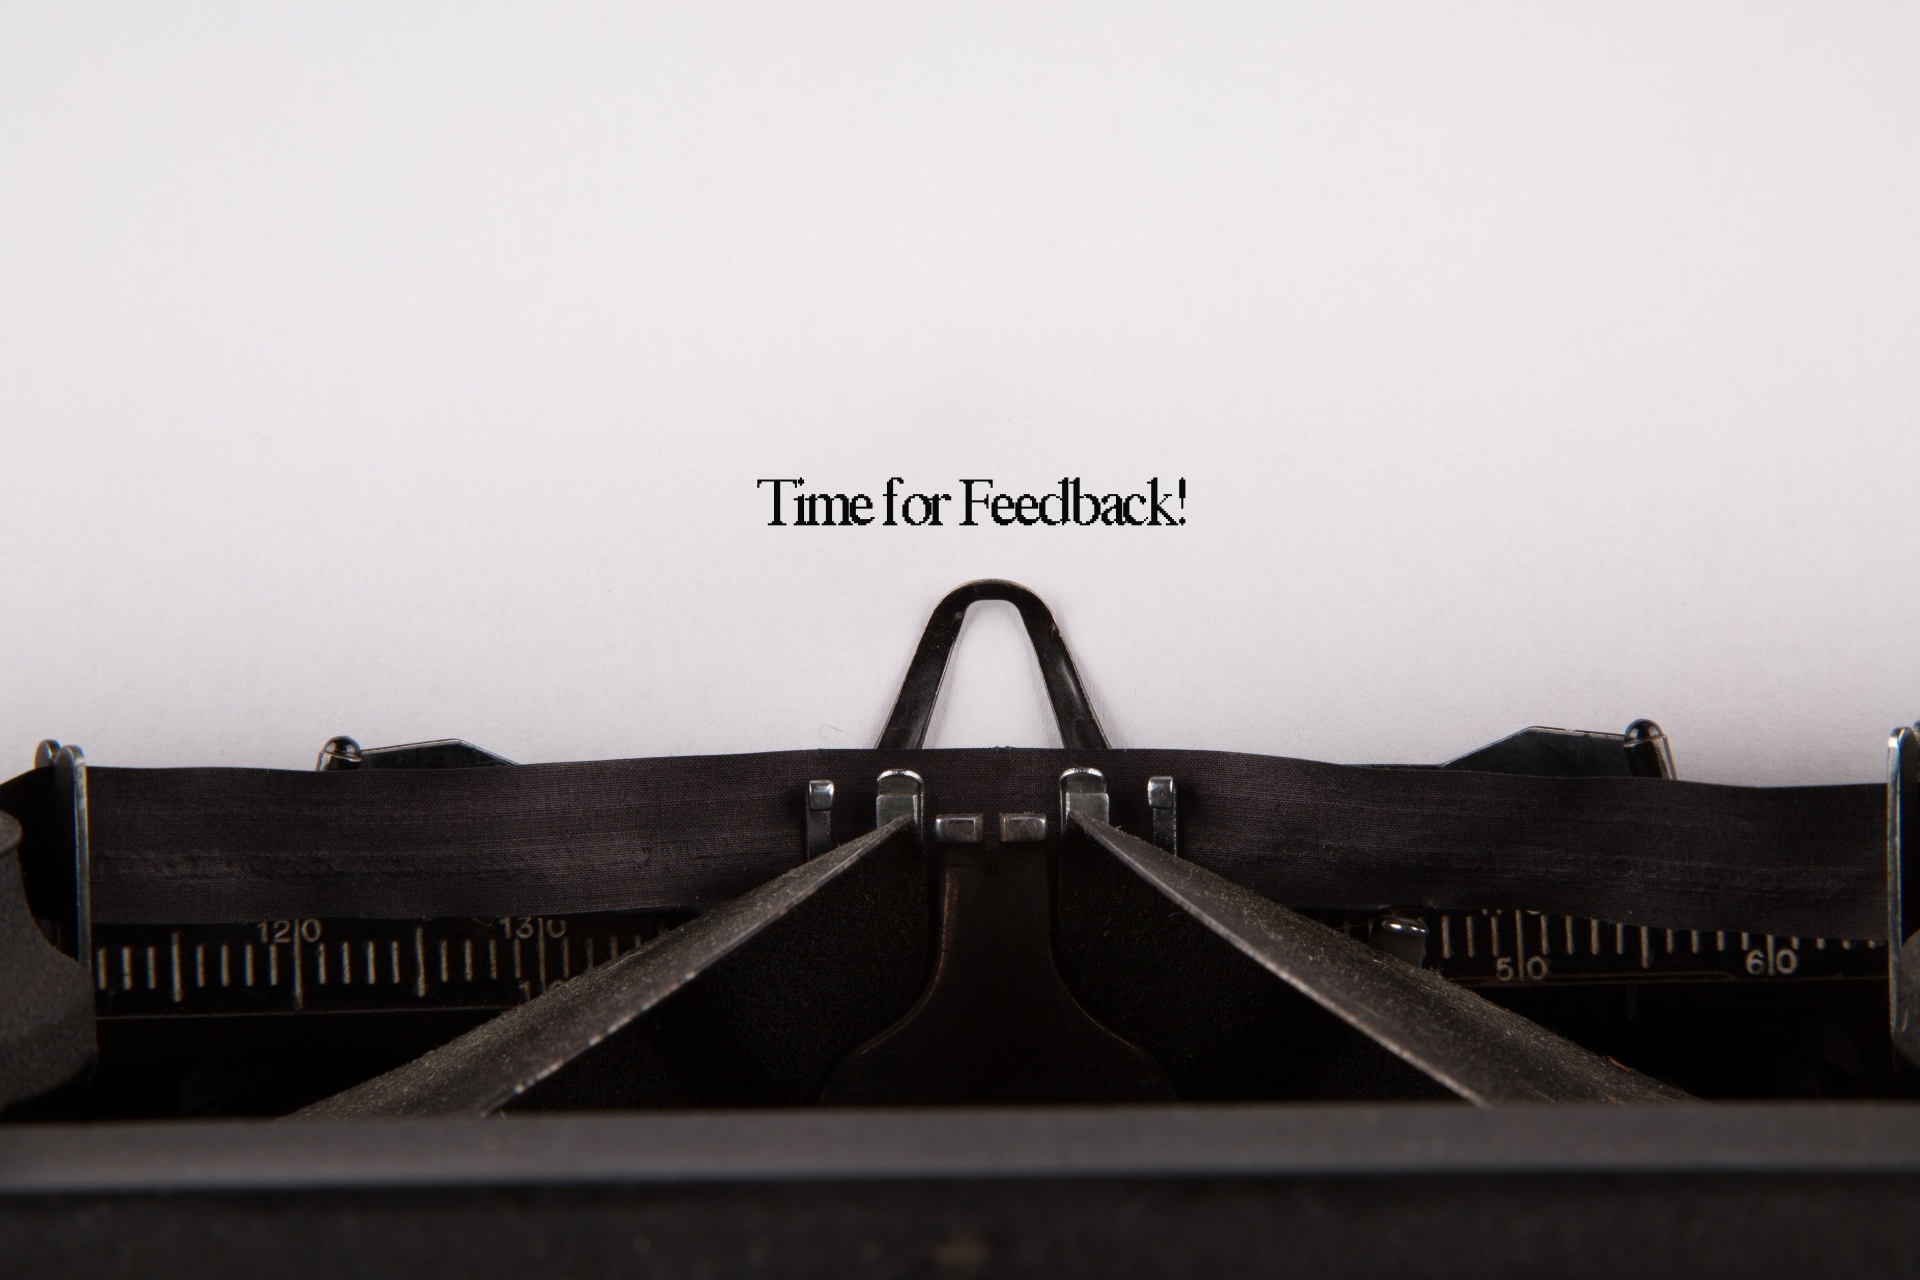 Time For Feedback